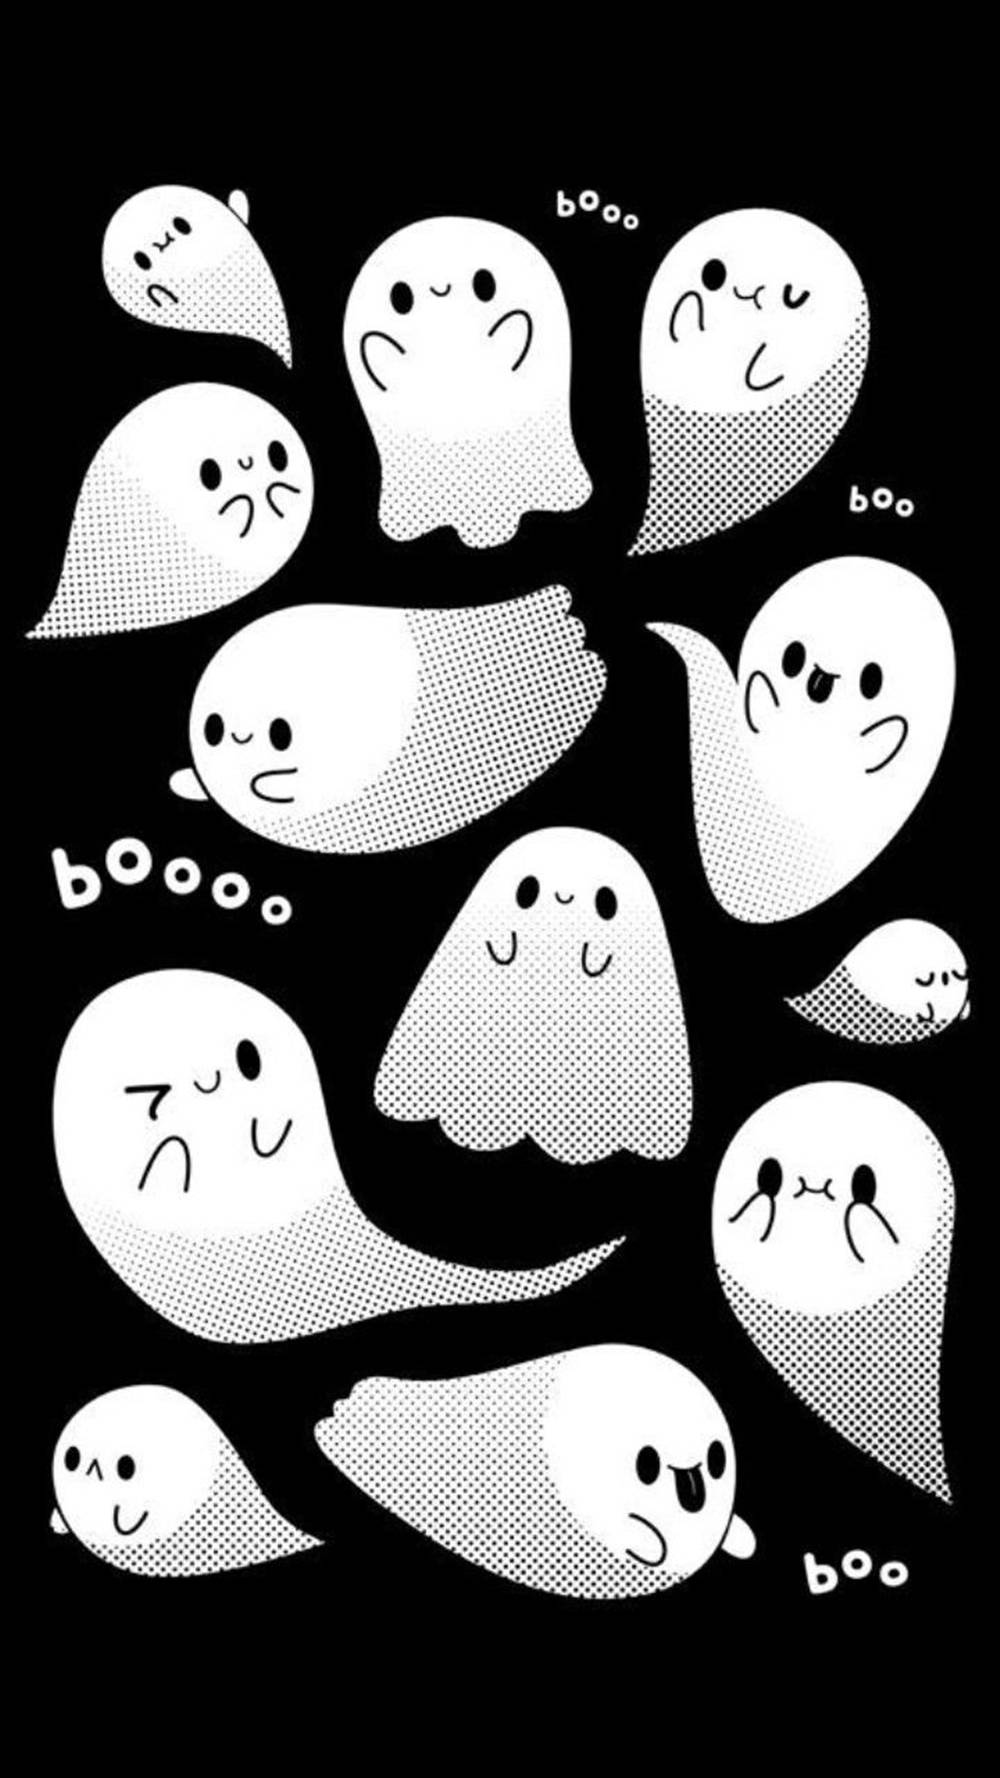 A set of cute ghost faces on black background - Ghost